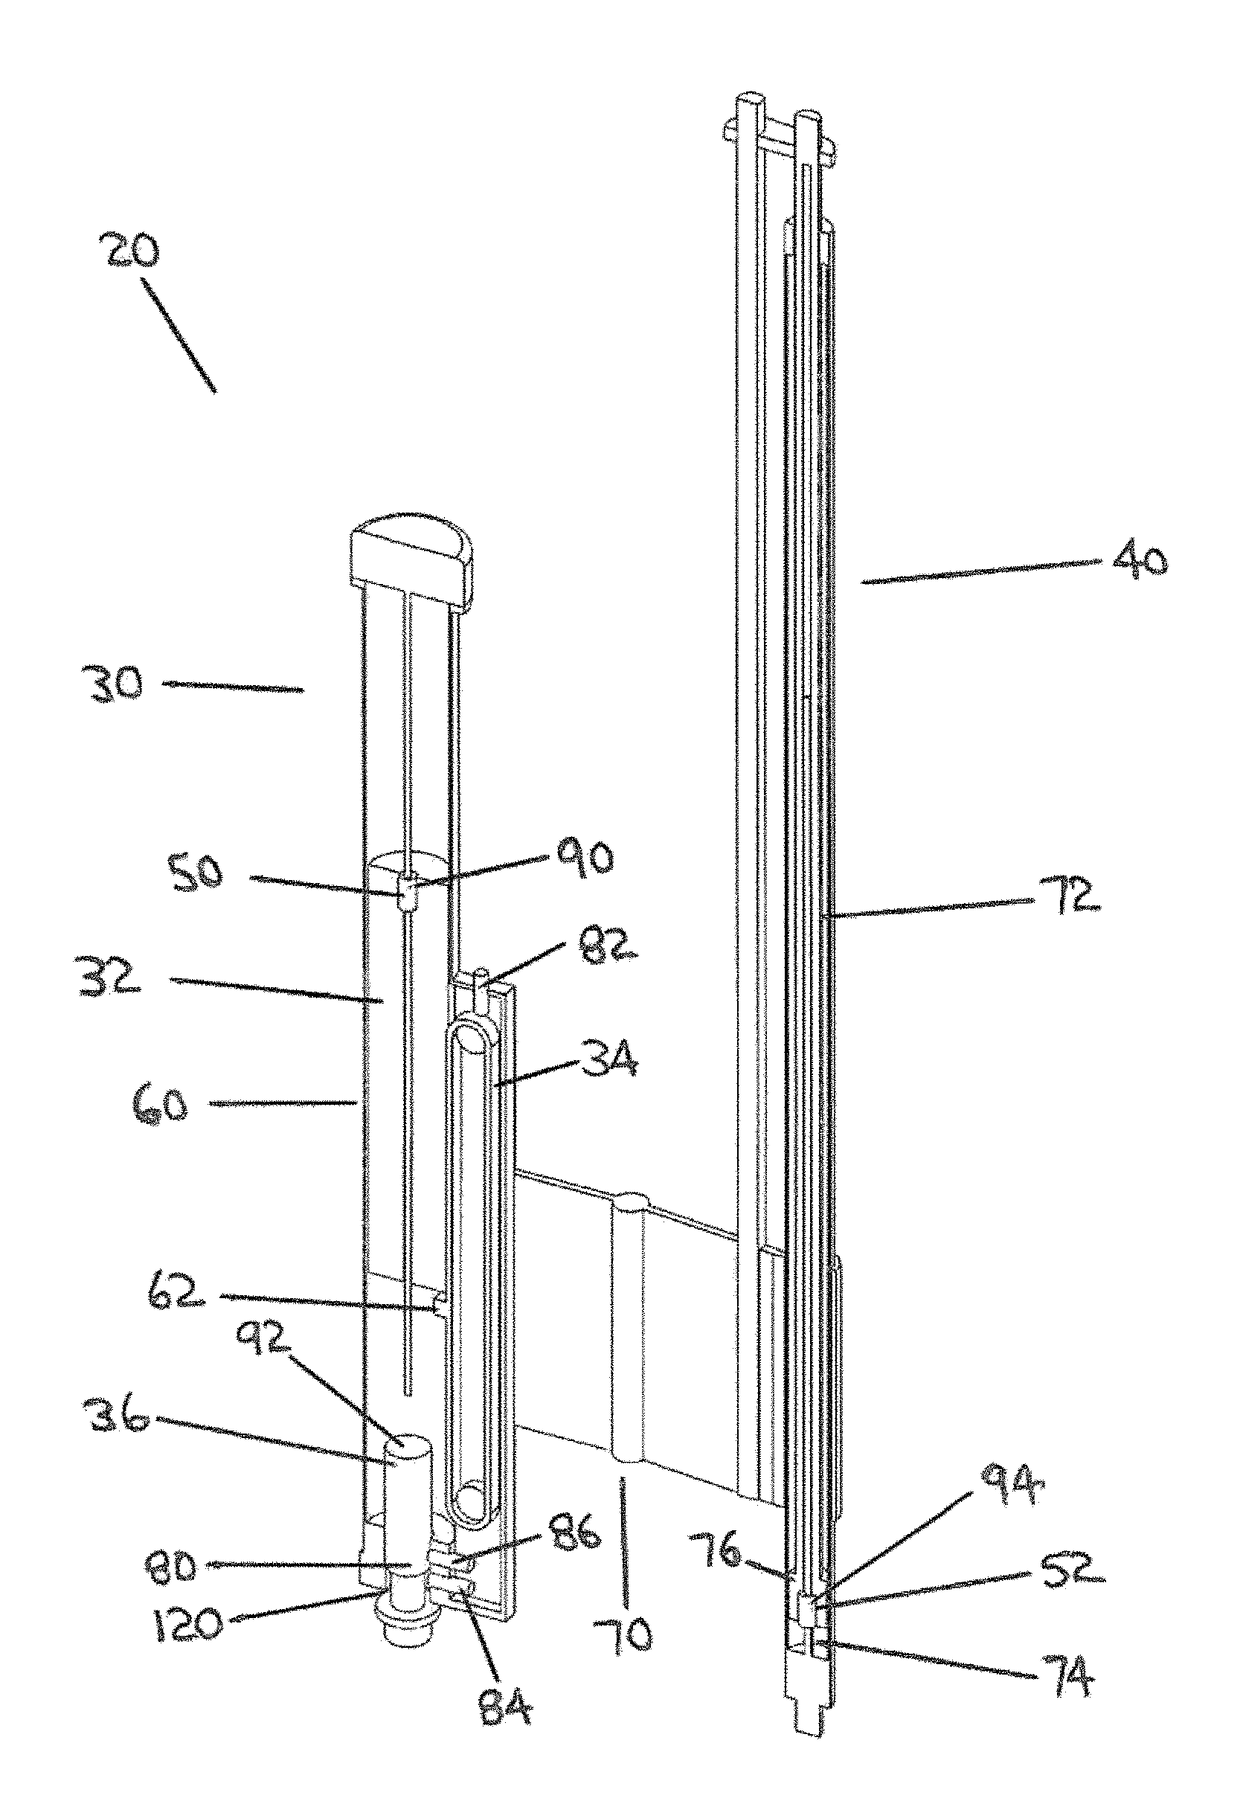 An apparatus and a method for performing a standard penetration test